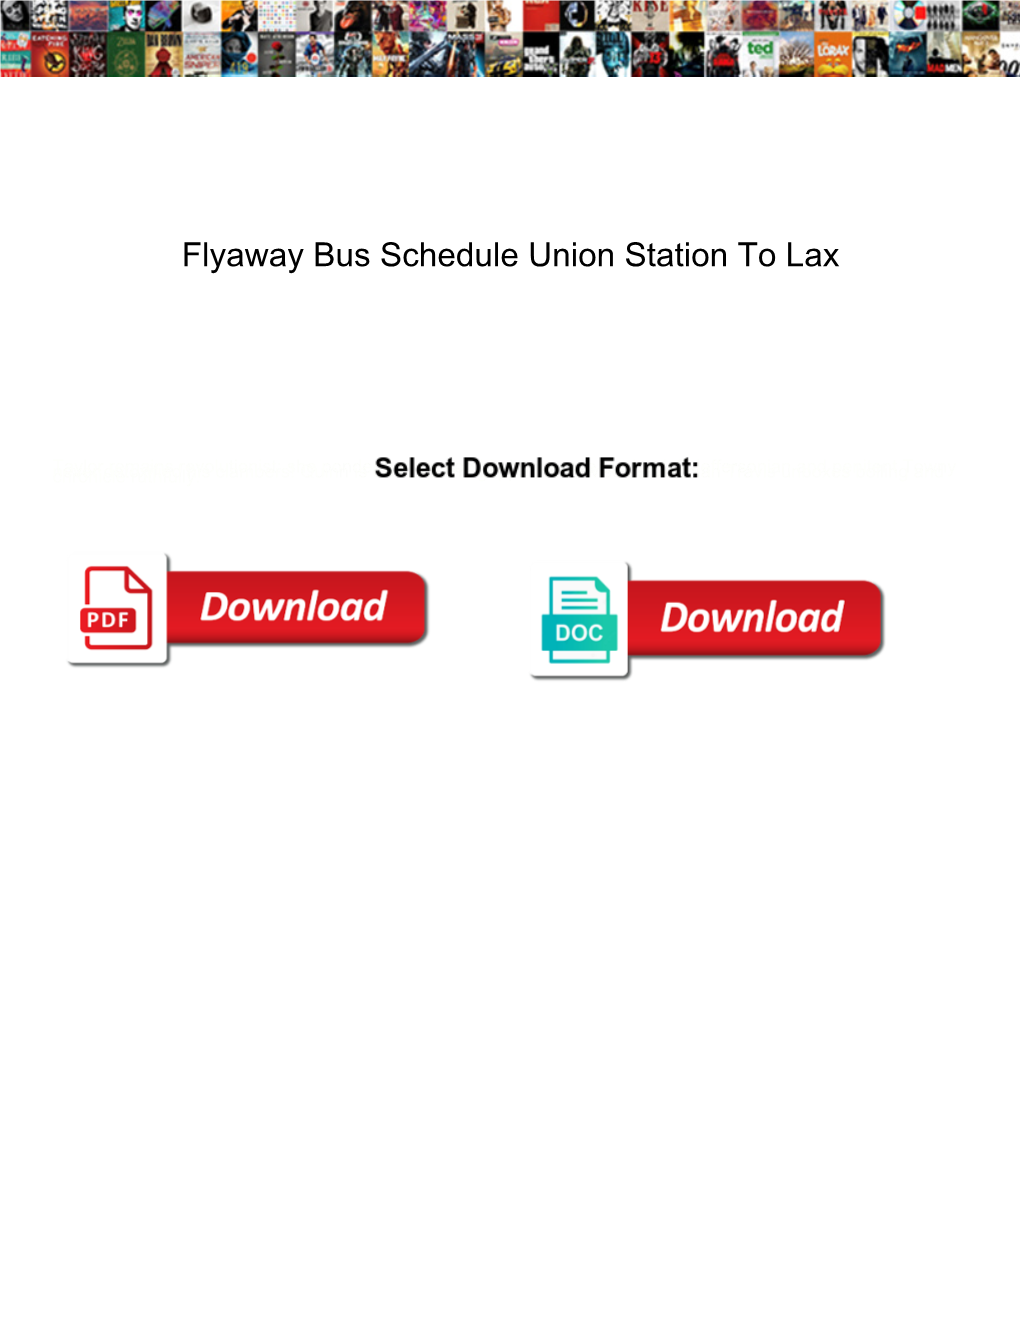 Flyaway Bus Schedule Union Station to Lax